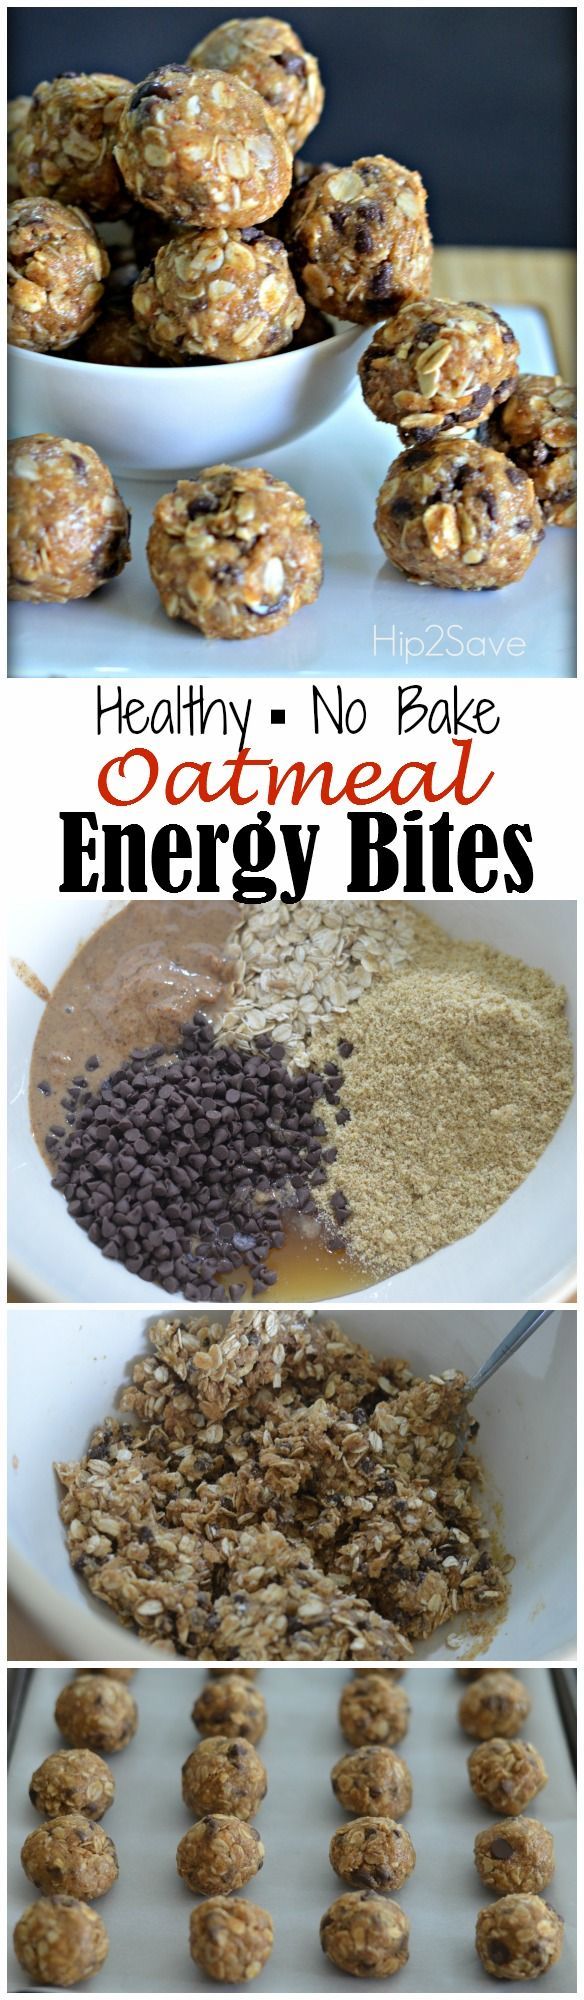 Oatmeal Energy Bites (Easy No-Bake Snack) – Hip2Save . Dates and date syrup instead of honey.